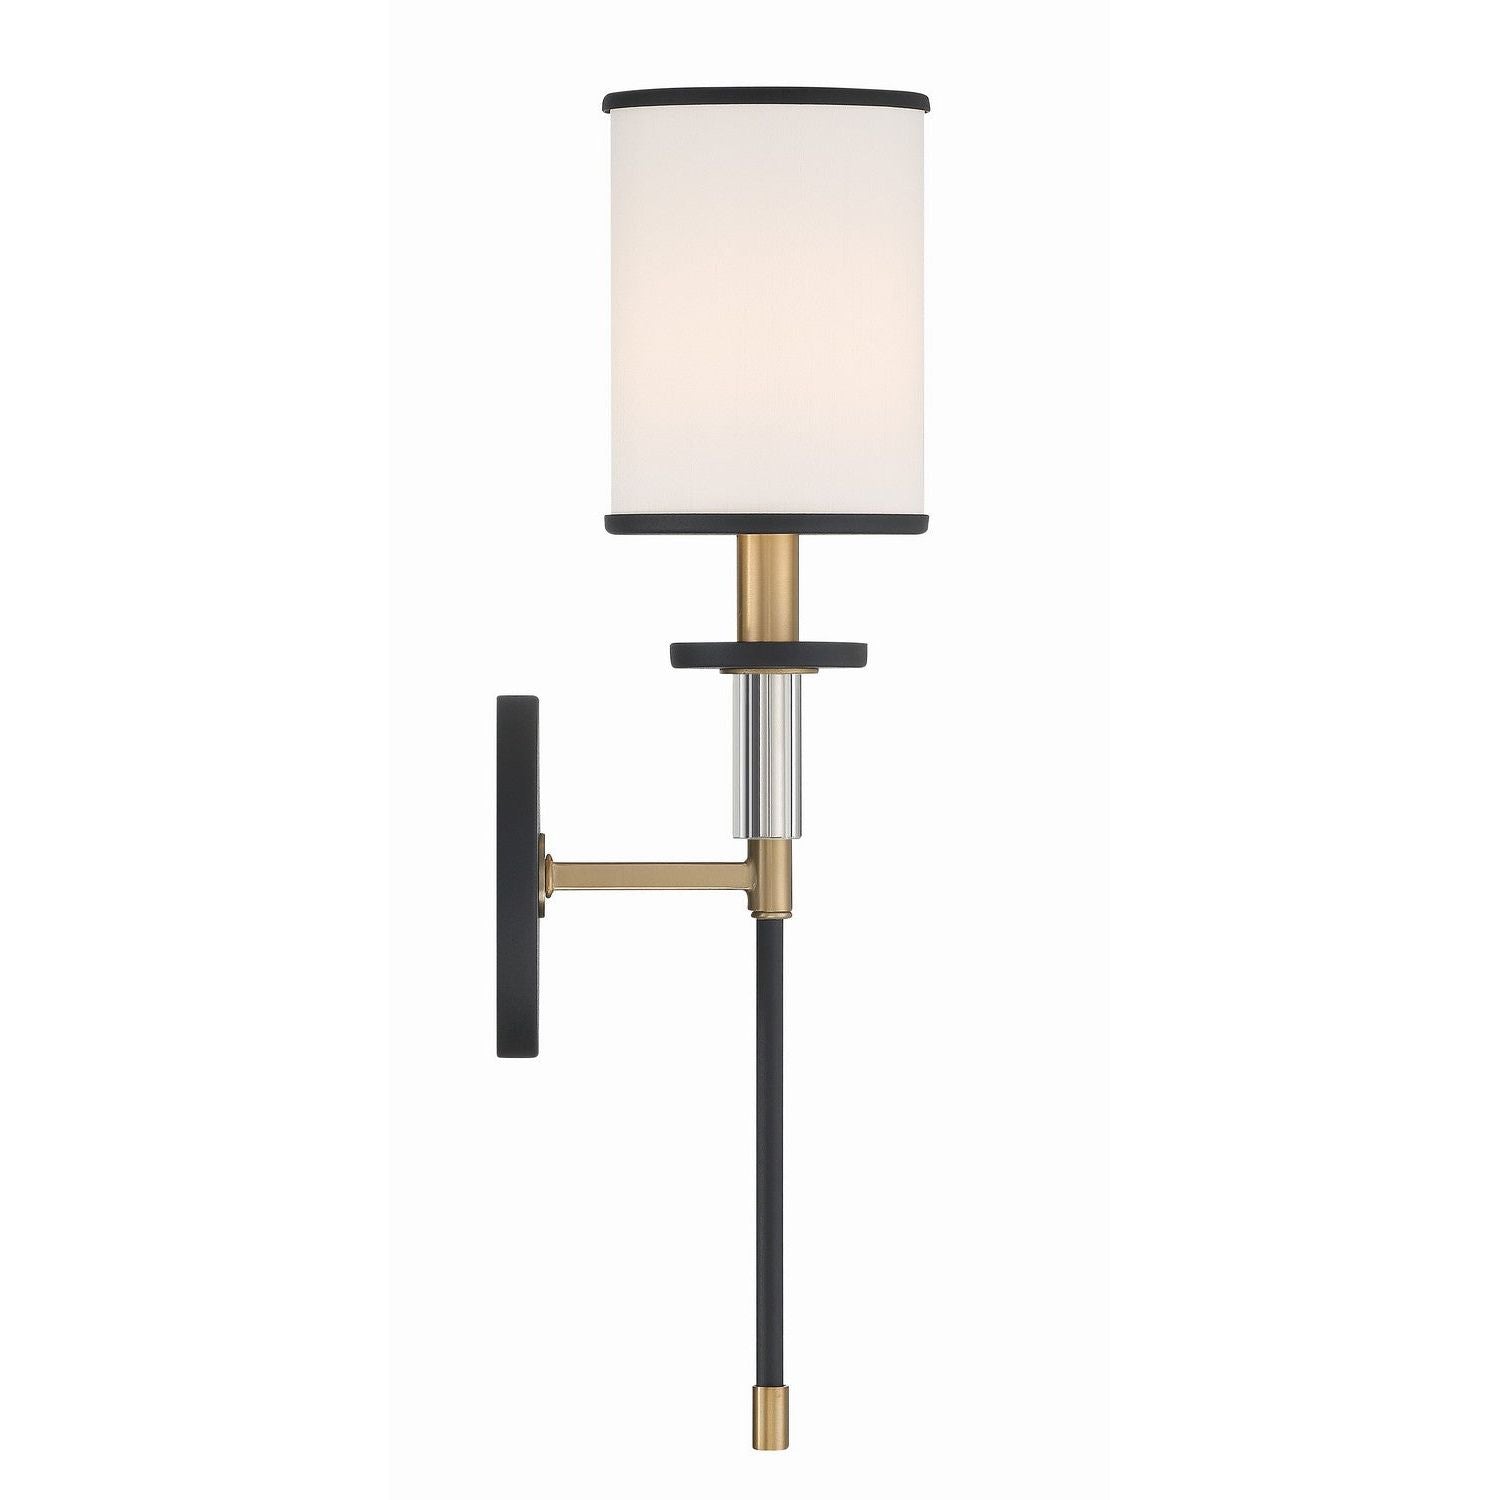 Crystorama - HAT-471-BF-VG - One Light Wall Mount - Hatfield - Black Forged / Vibrant Gold